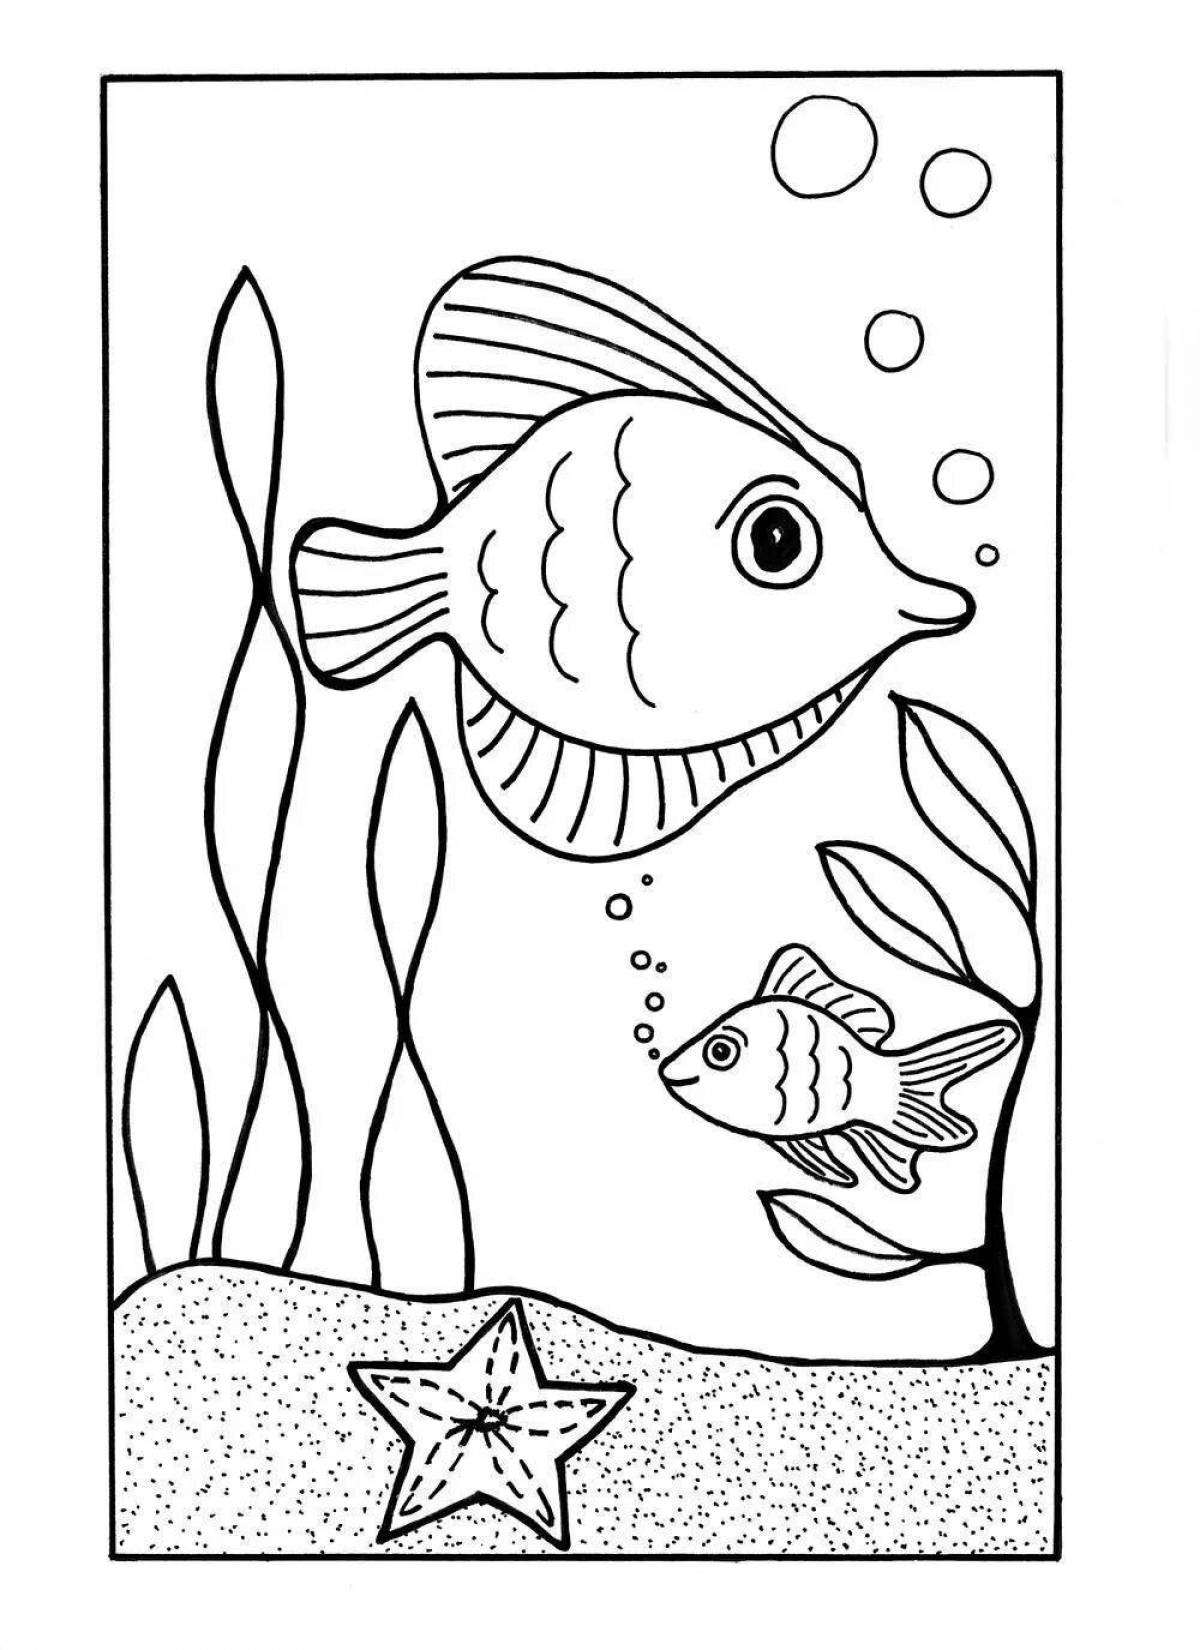 Colouring page enchanting underwater world